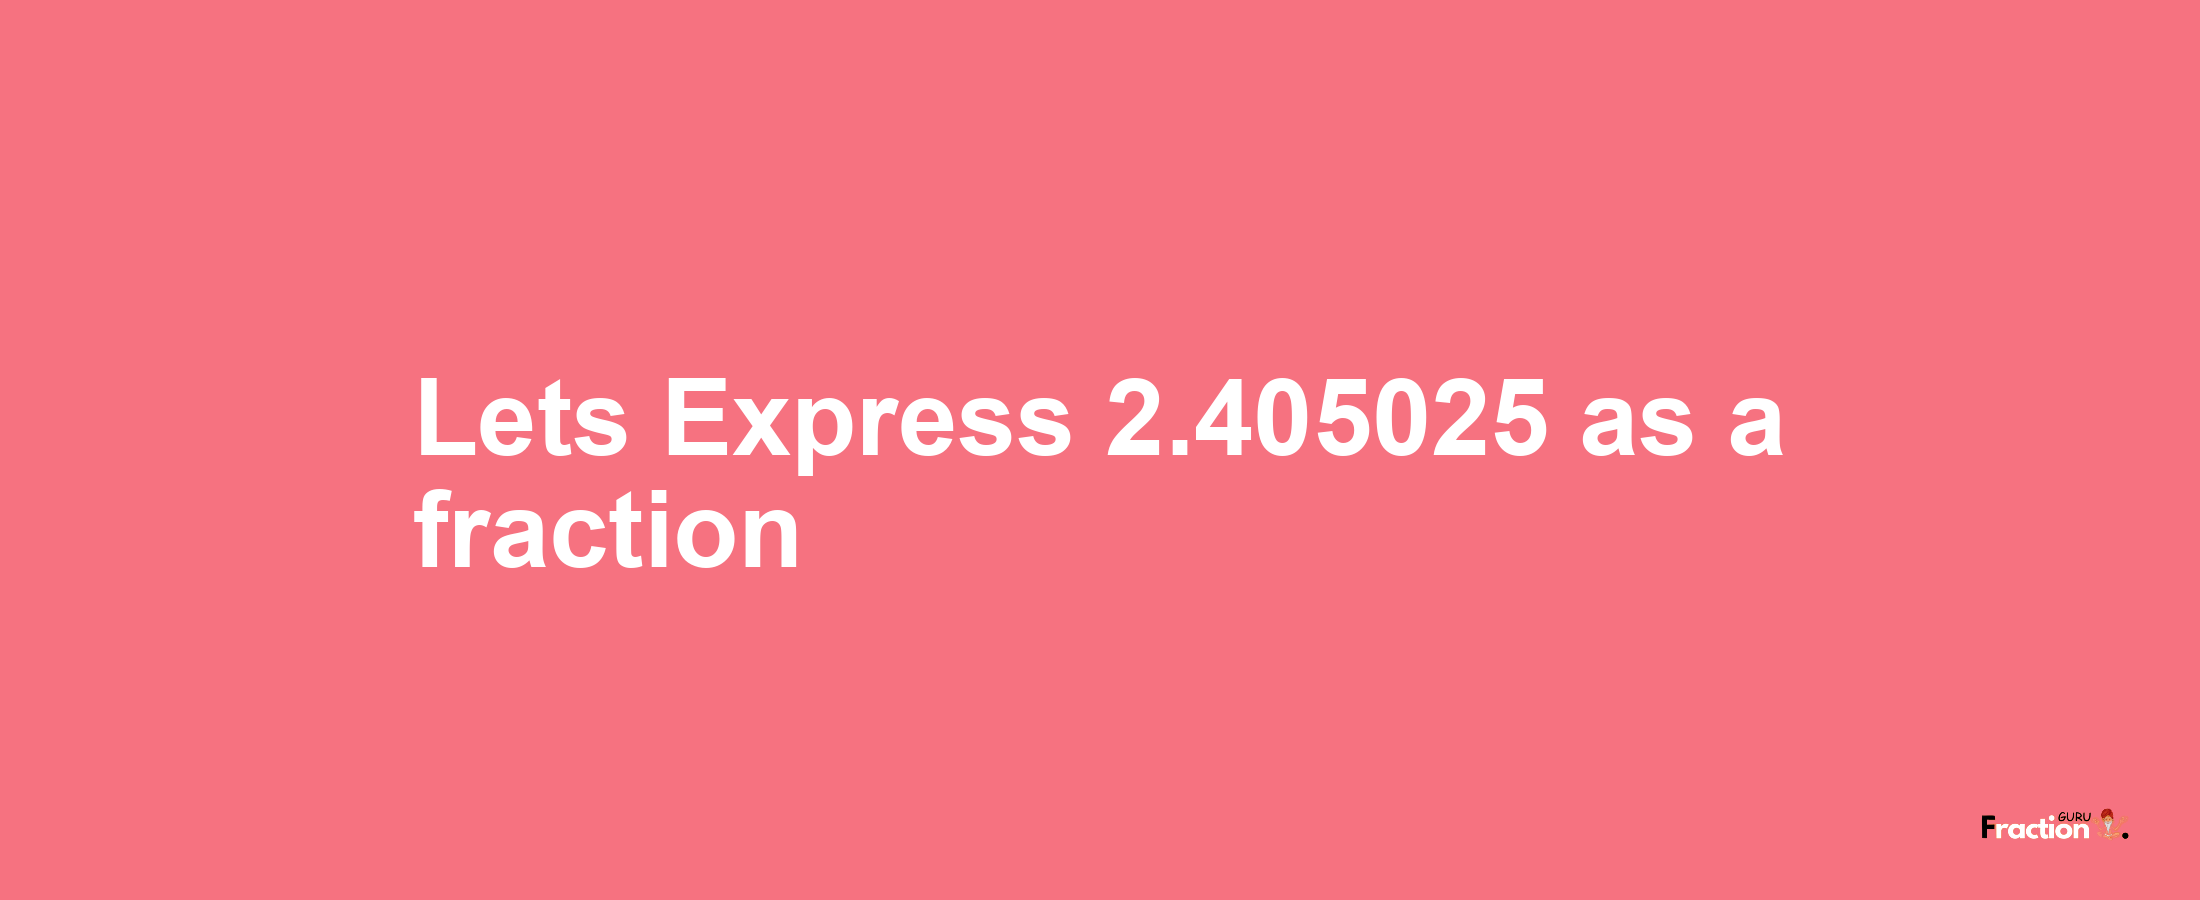 Lets Express 2.405025 as afraction